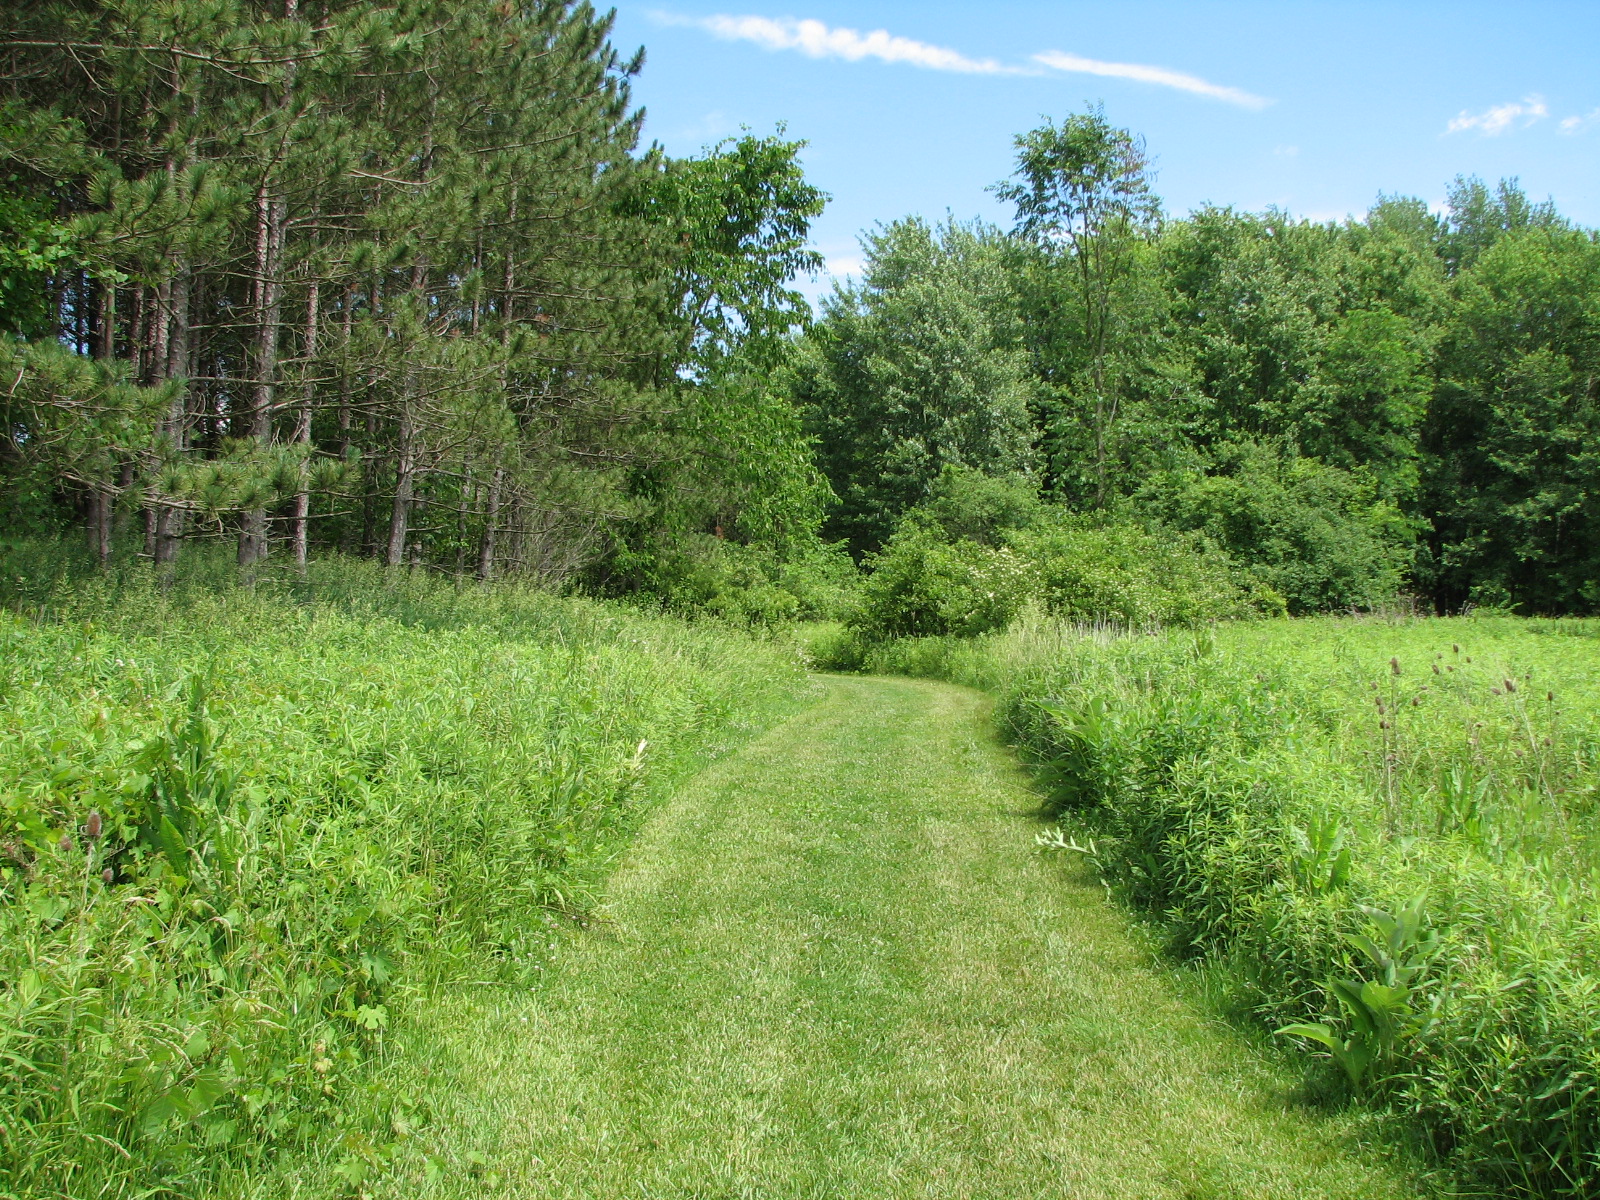 Caley Reservation's natural grass hiking trail